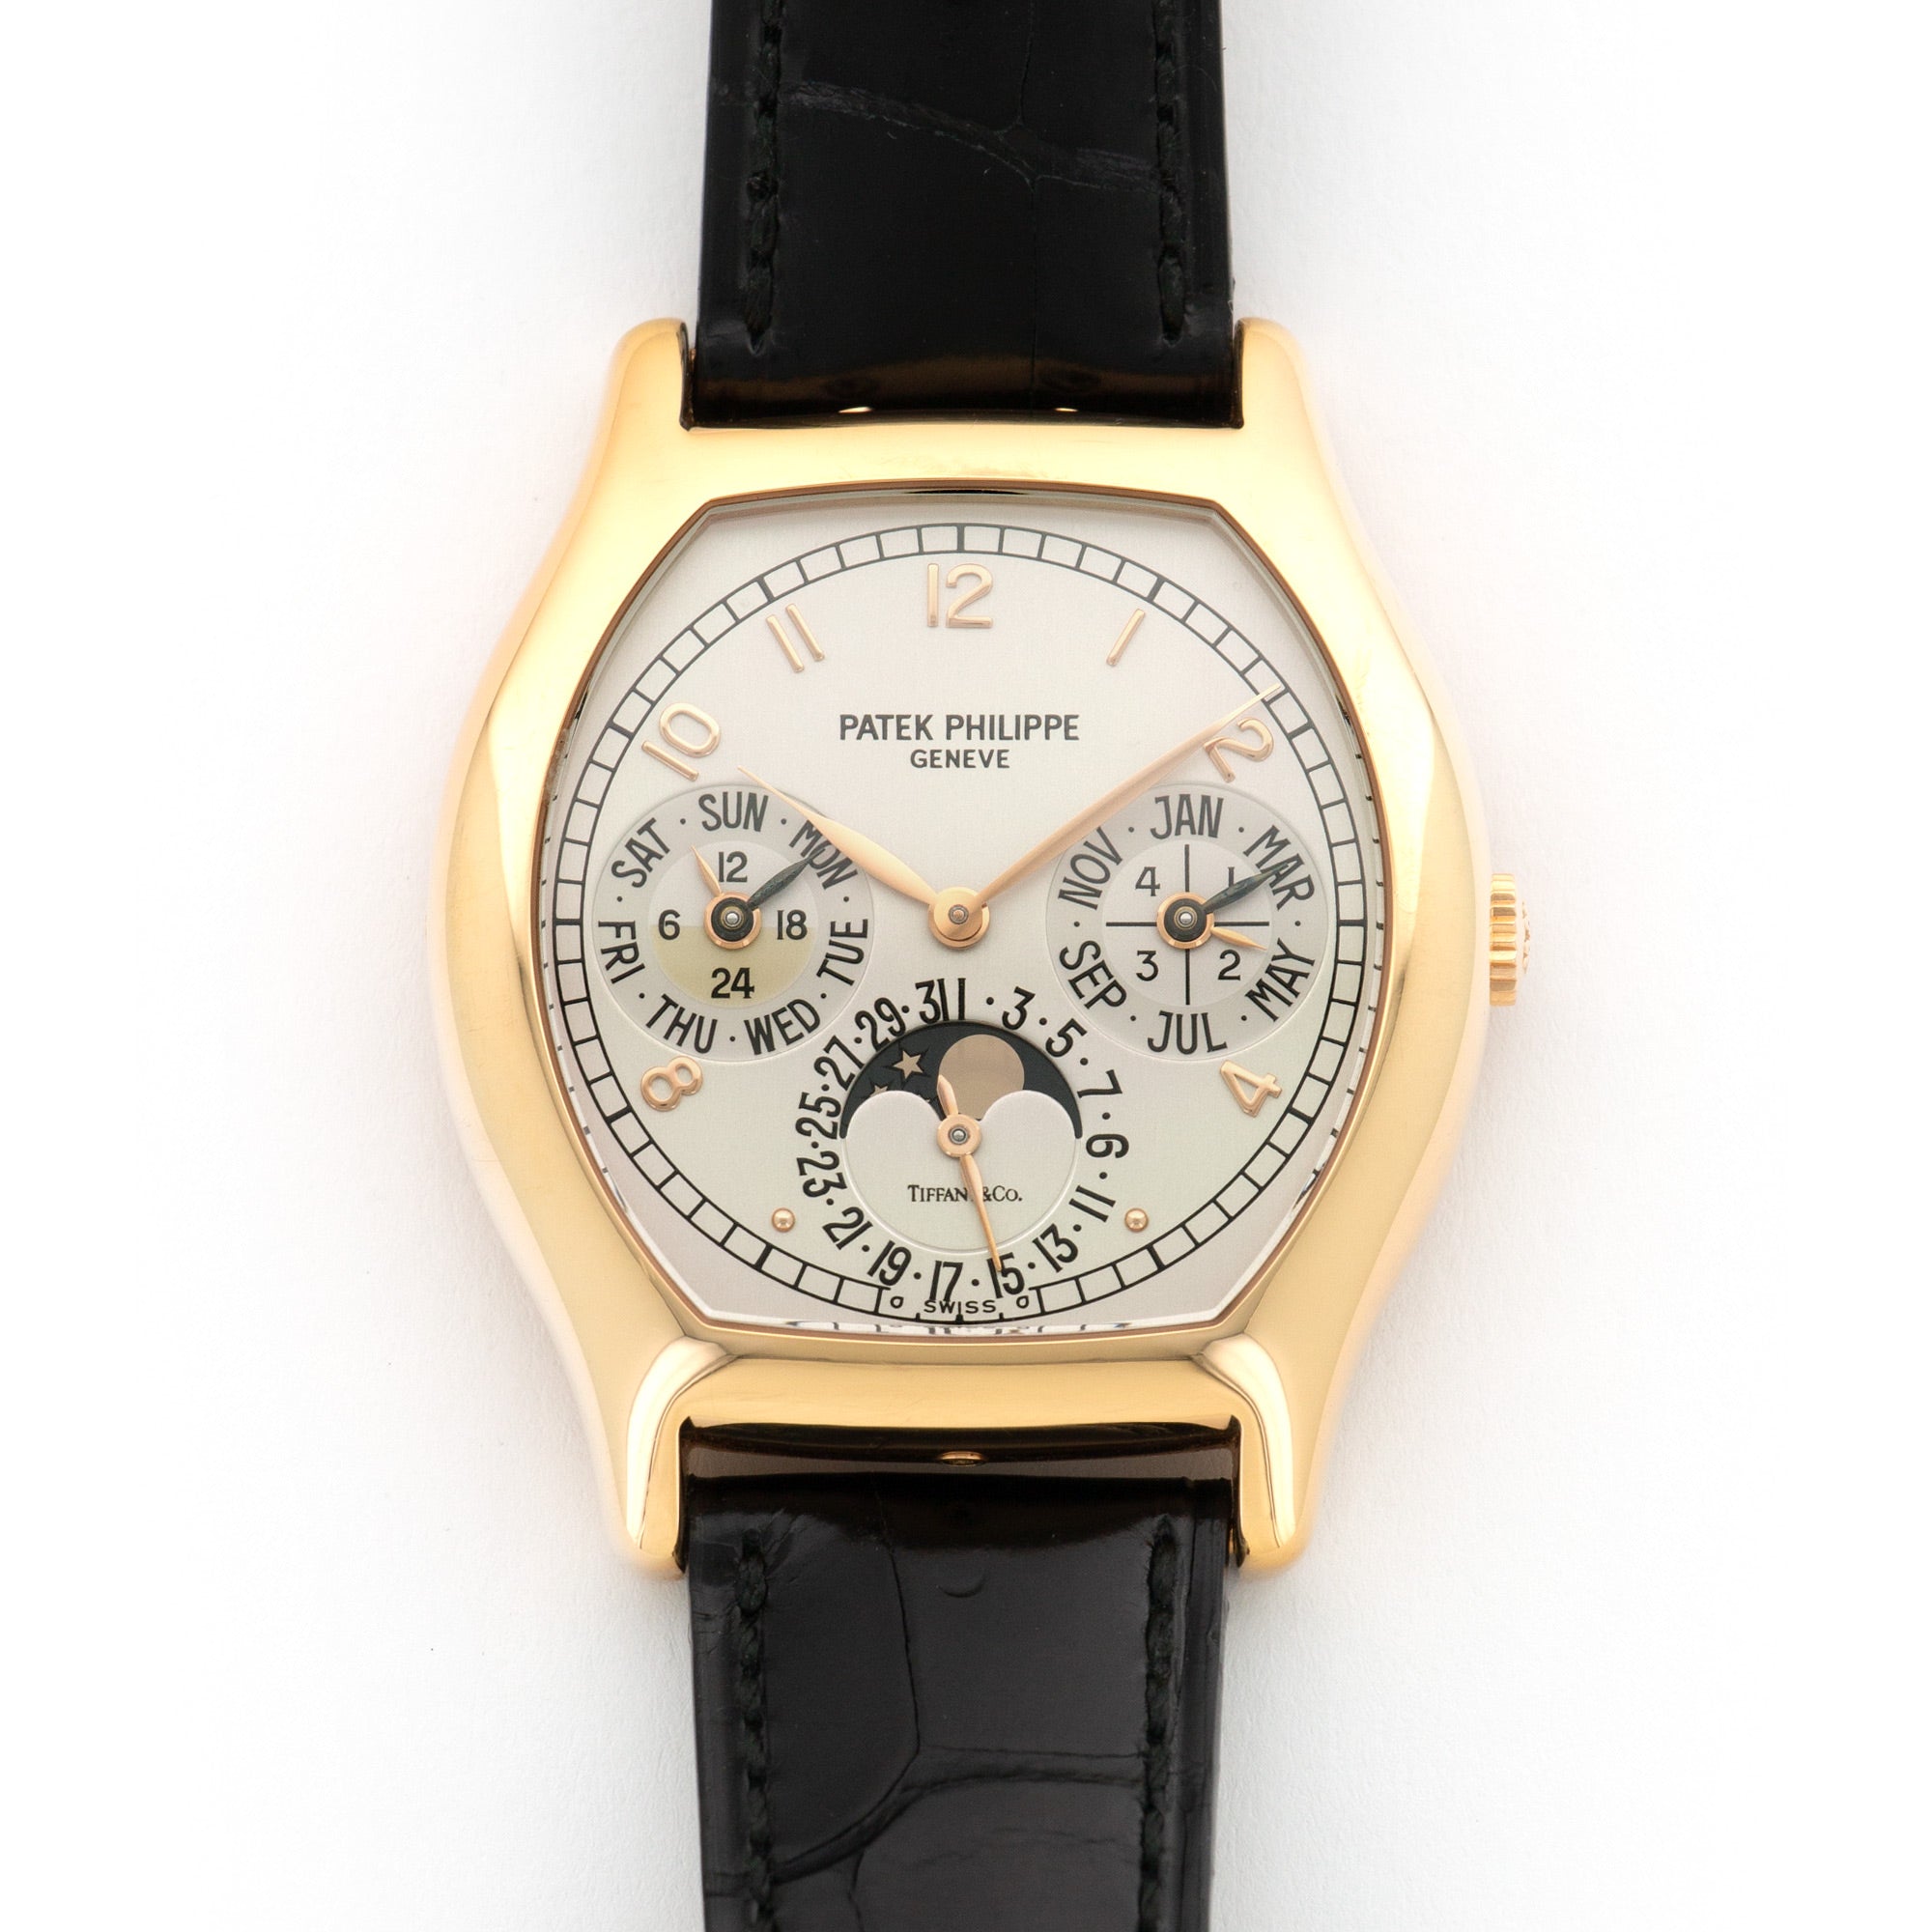 Patek Philippe - Patek Philippe Rose Gold Perpetual Calendar Watch Ref. 5040 Retailed by Tiffany & Co. - The Keystone Watches